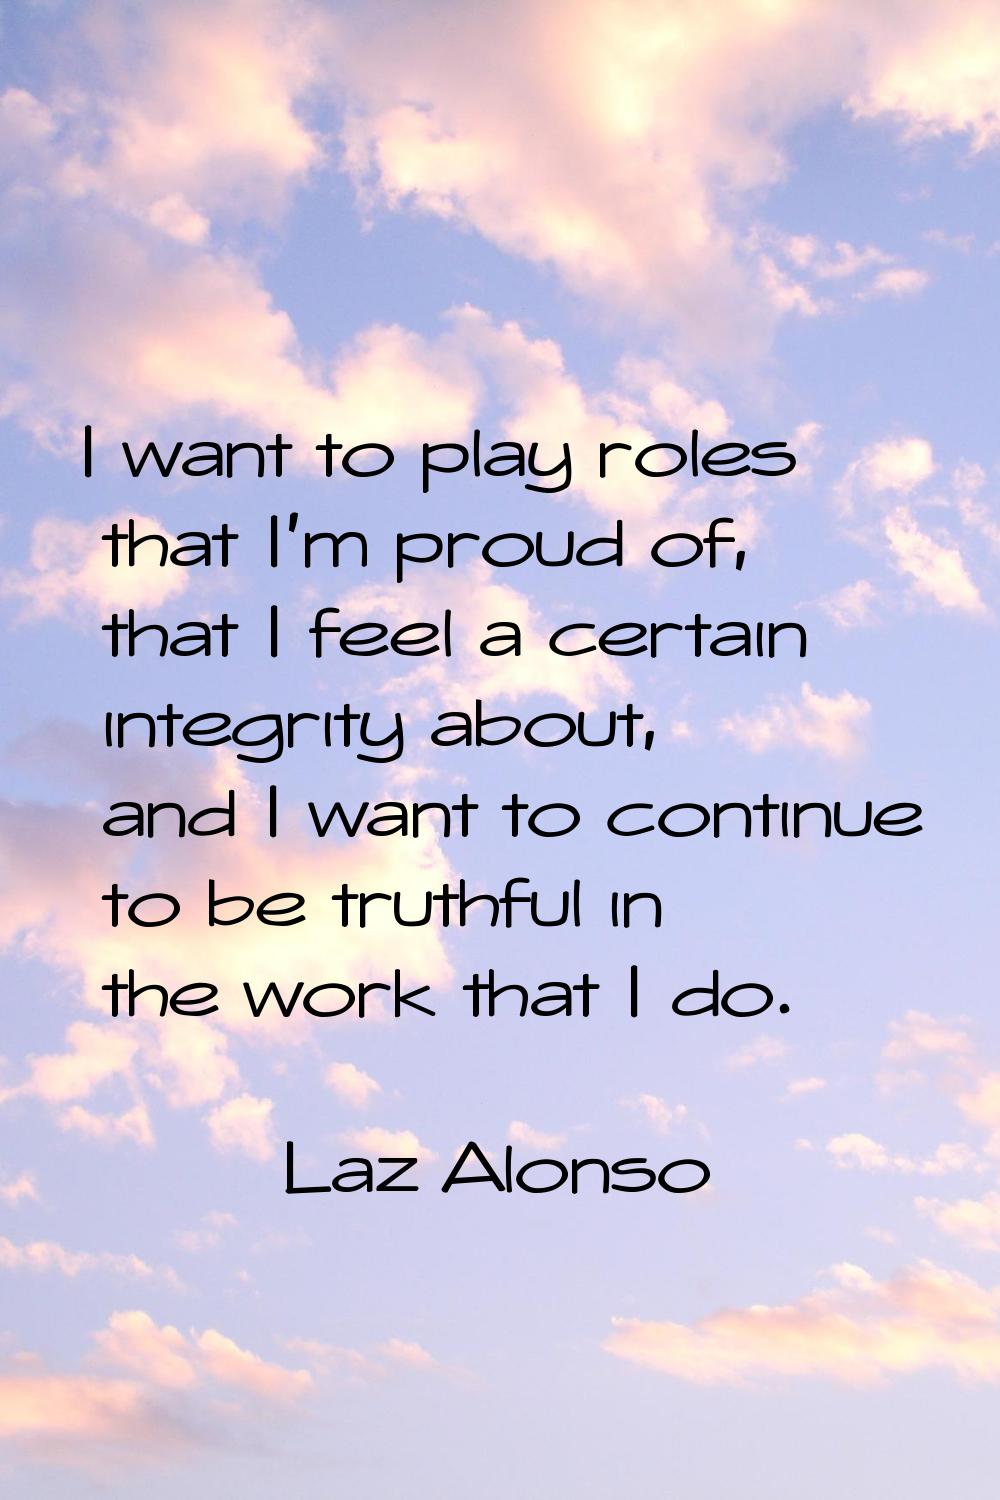 I want to play roles that I'm proud of, that I feel a certain integrity about, and I want to contin